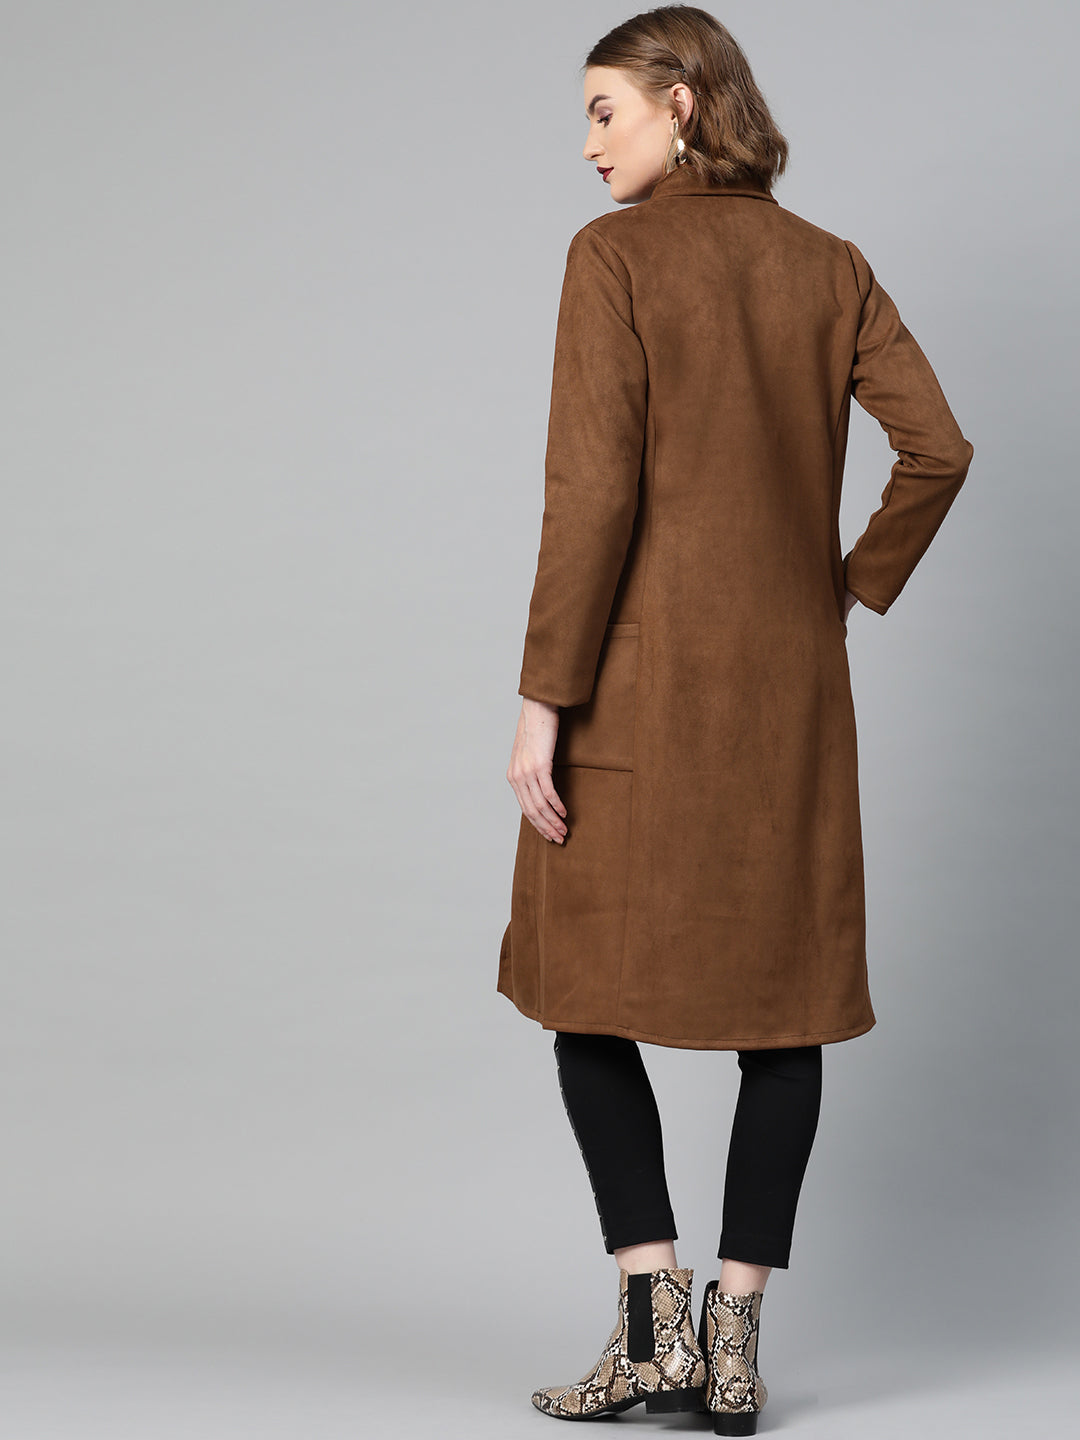 Athena Women Brown Suede Finish Solid Overcoat - Athena Lifestyle